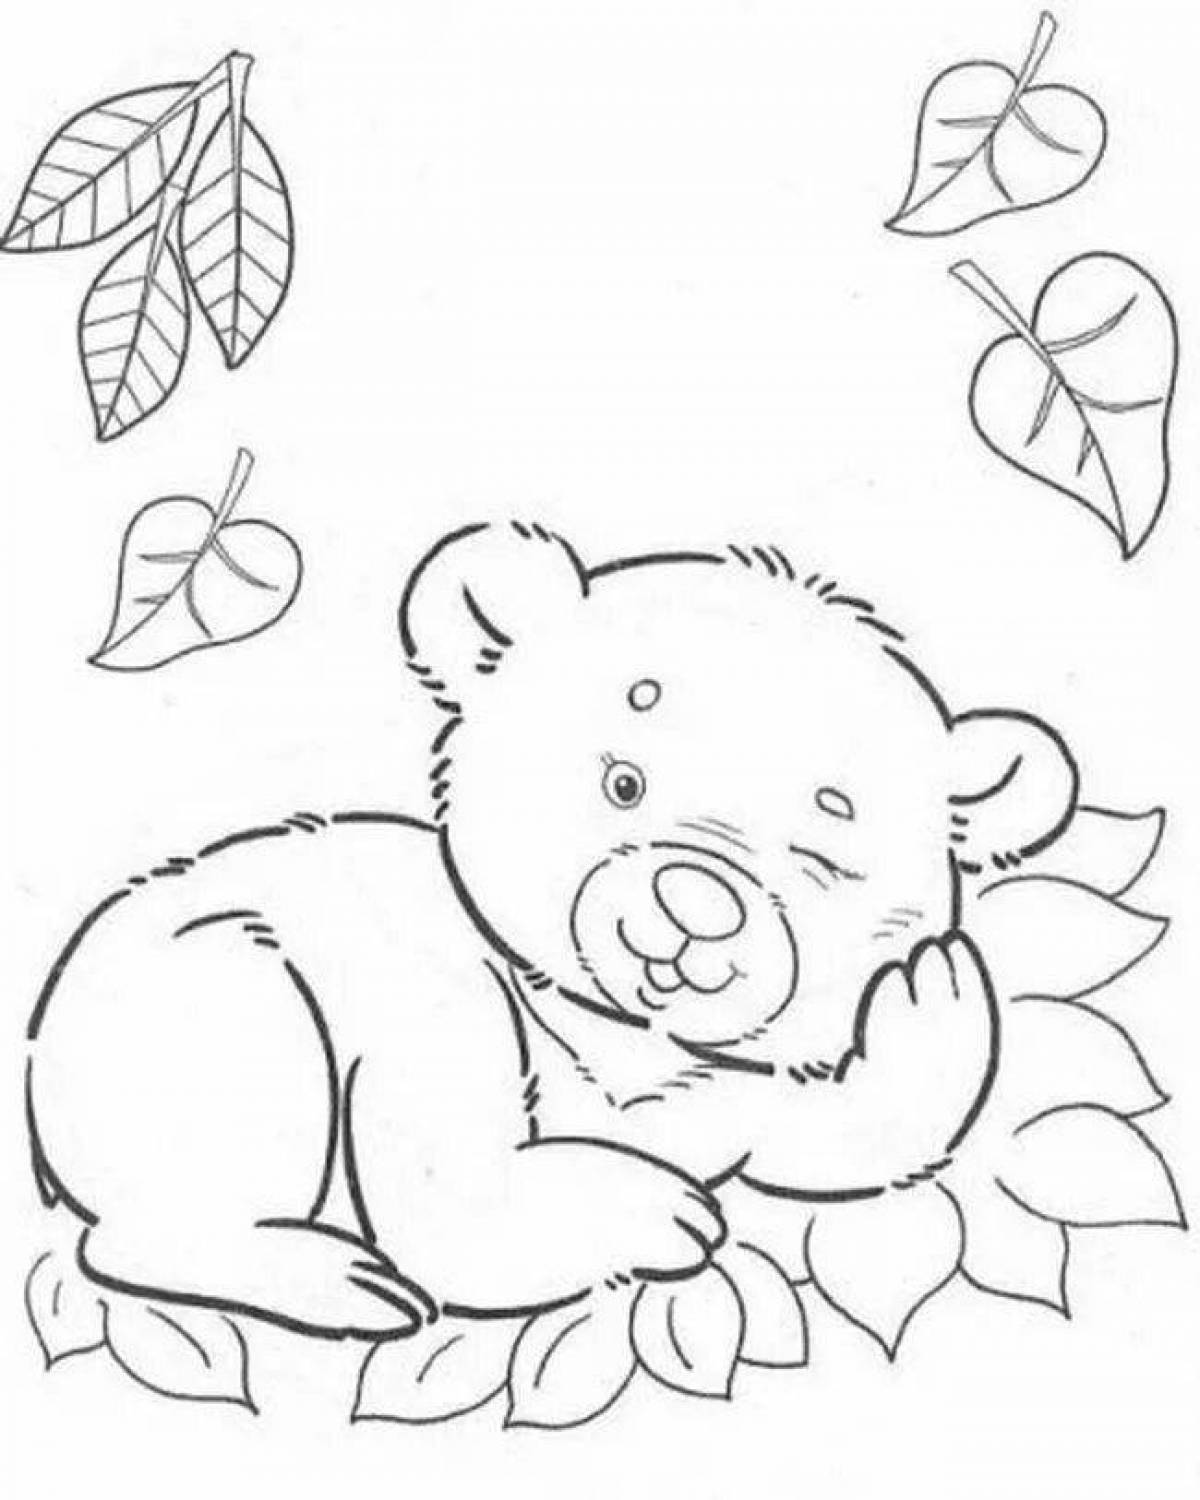 Coloring book mischievous bear in the forest